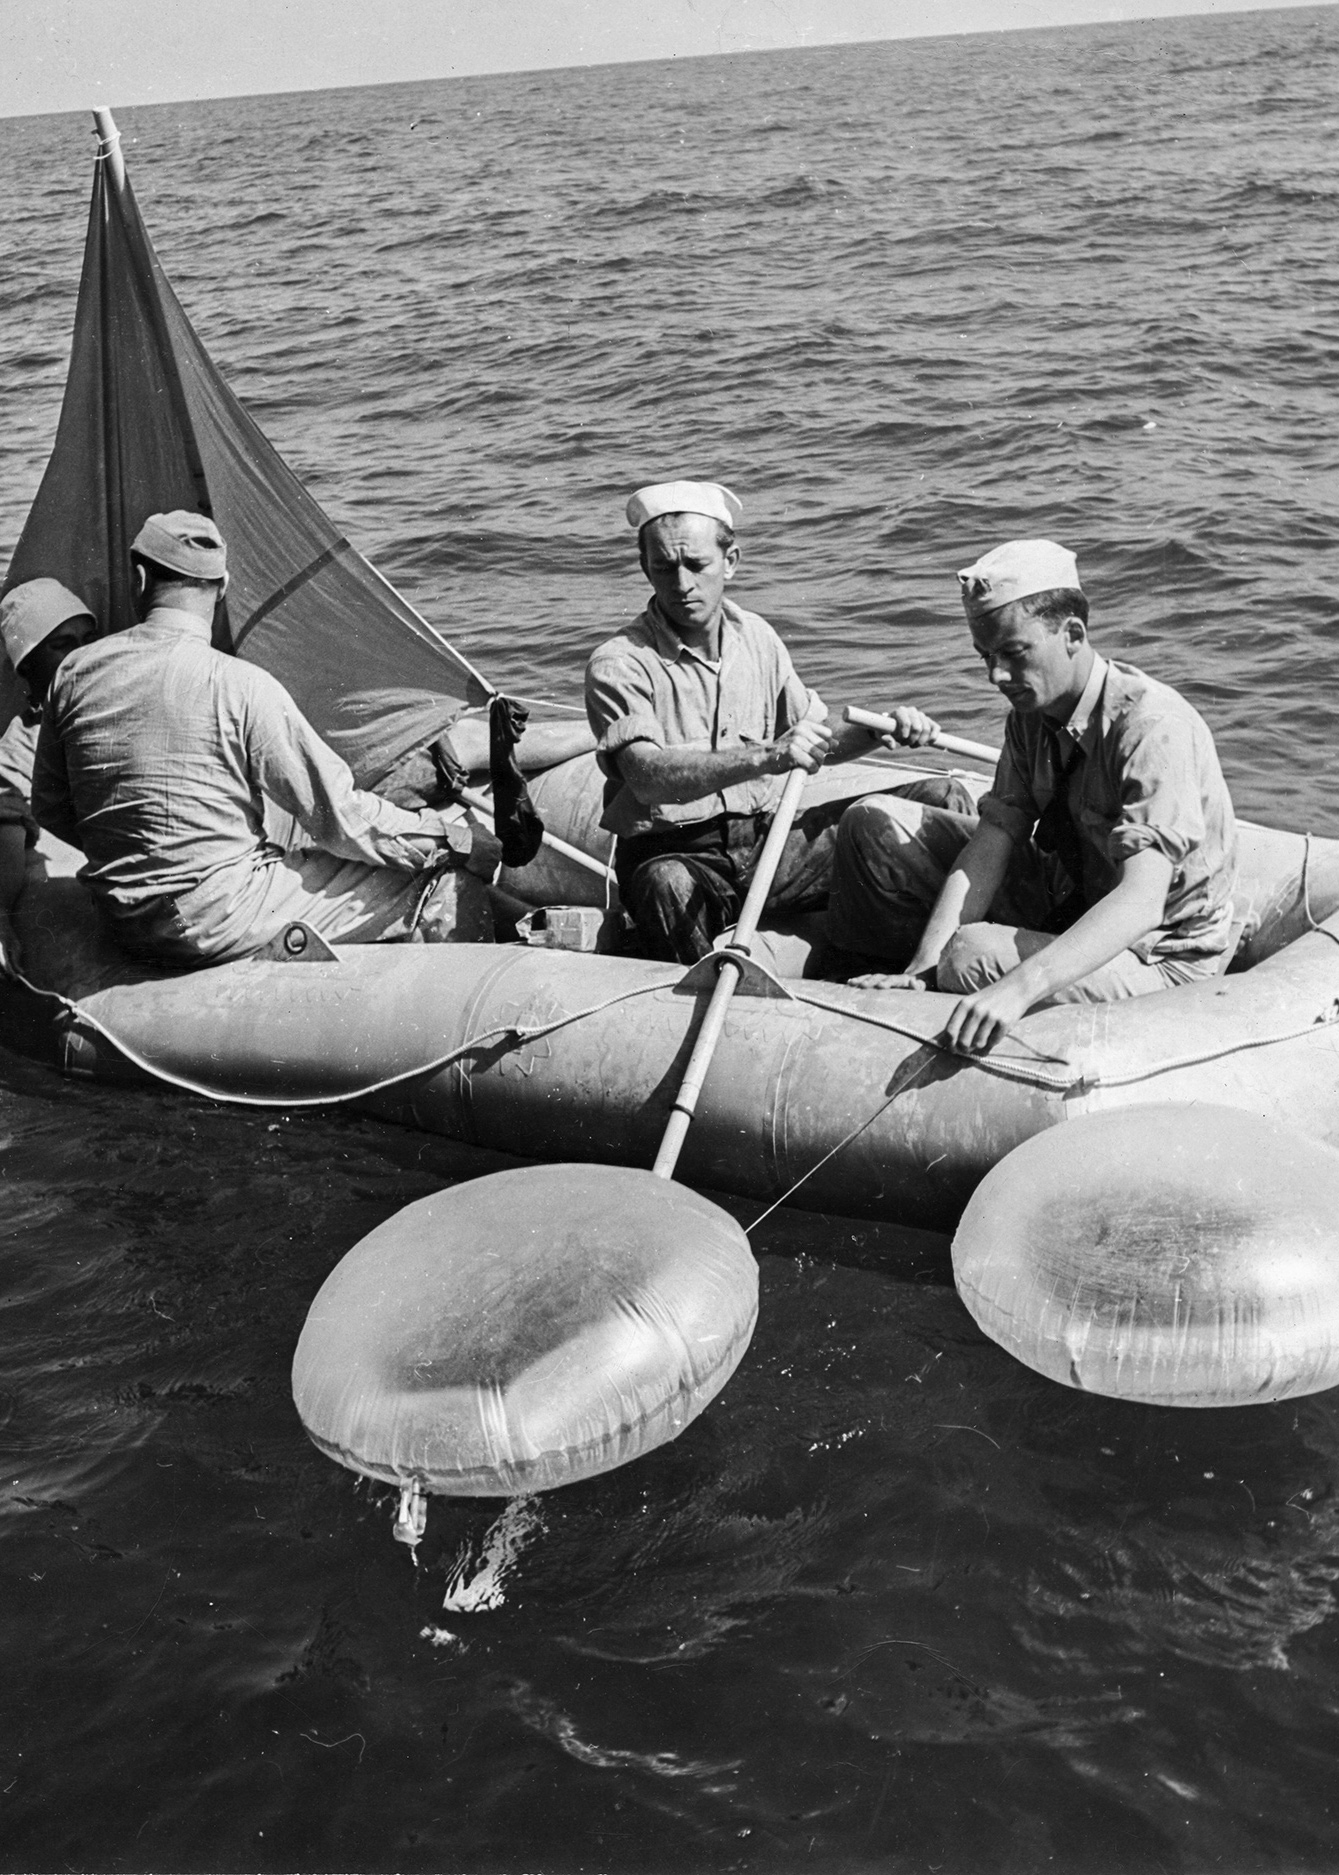 In a black-and-white, mid-20th century image, three uniformed men on a life raft look at two balloon-like containers floating on the water close to their raft.